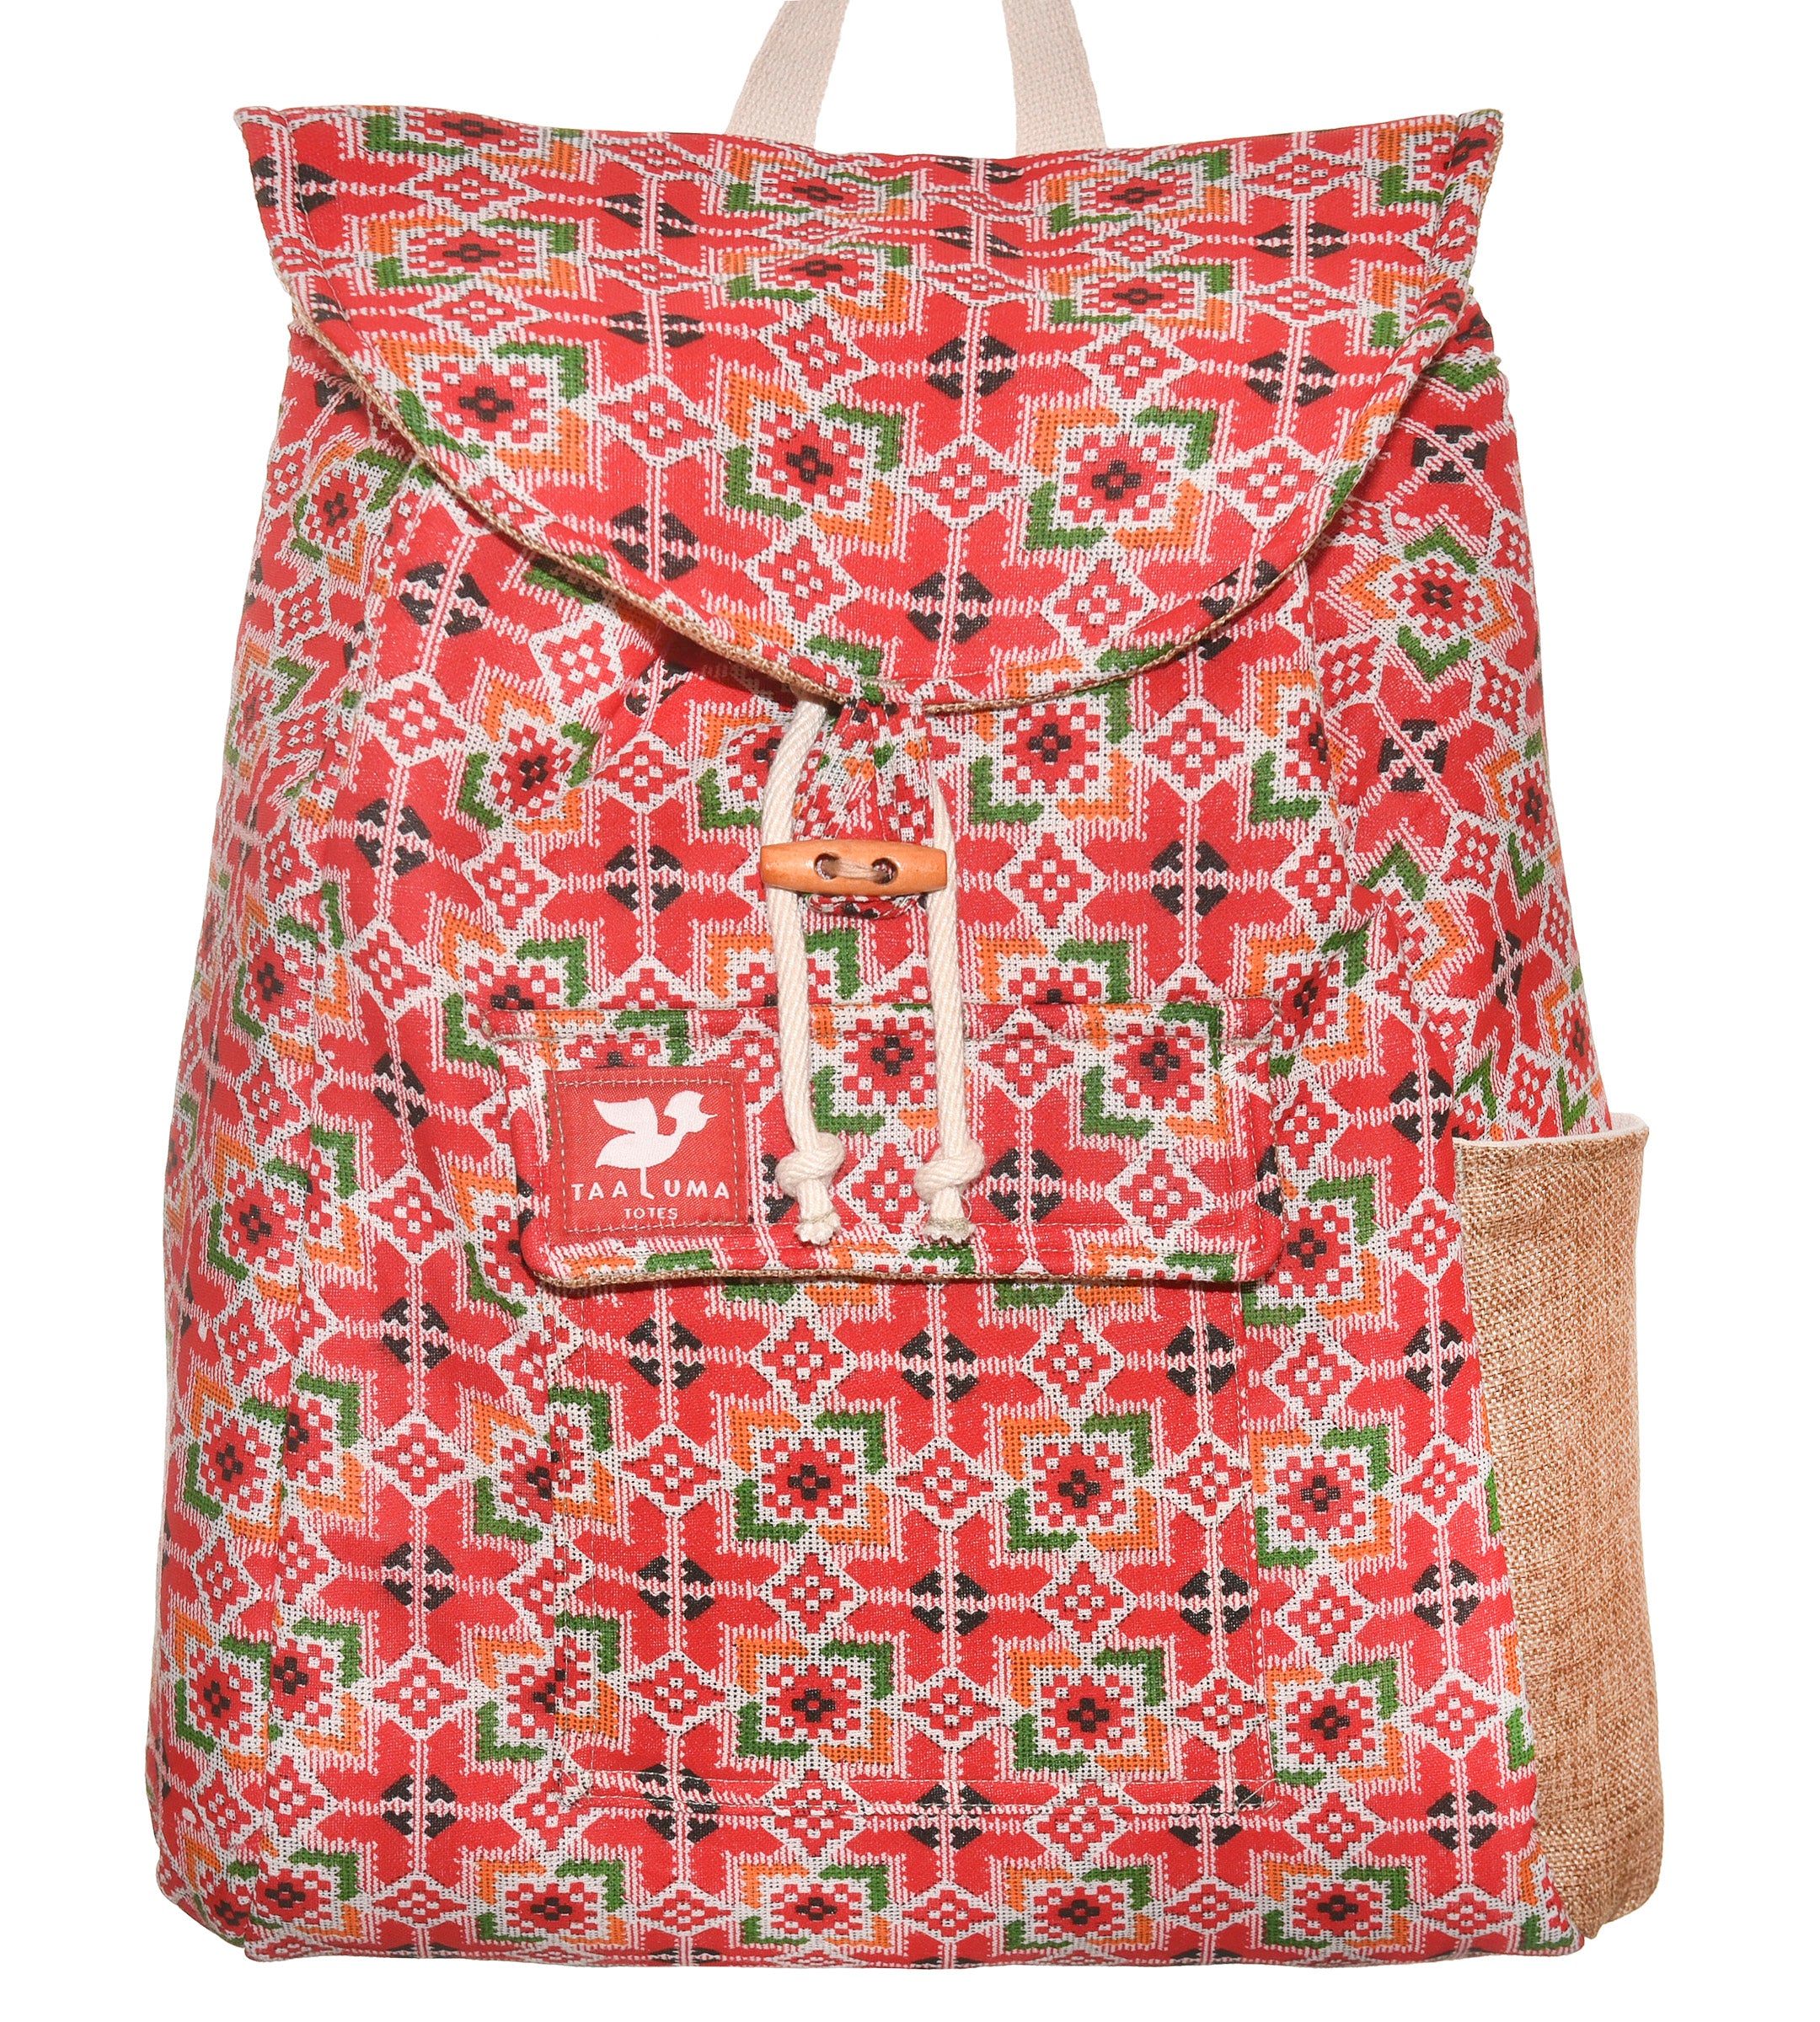 Nepal Tote (by Roger Conn)